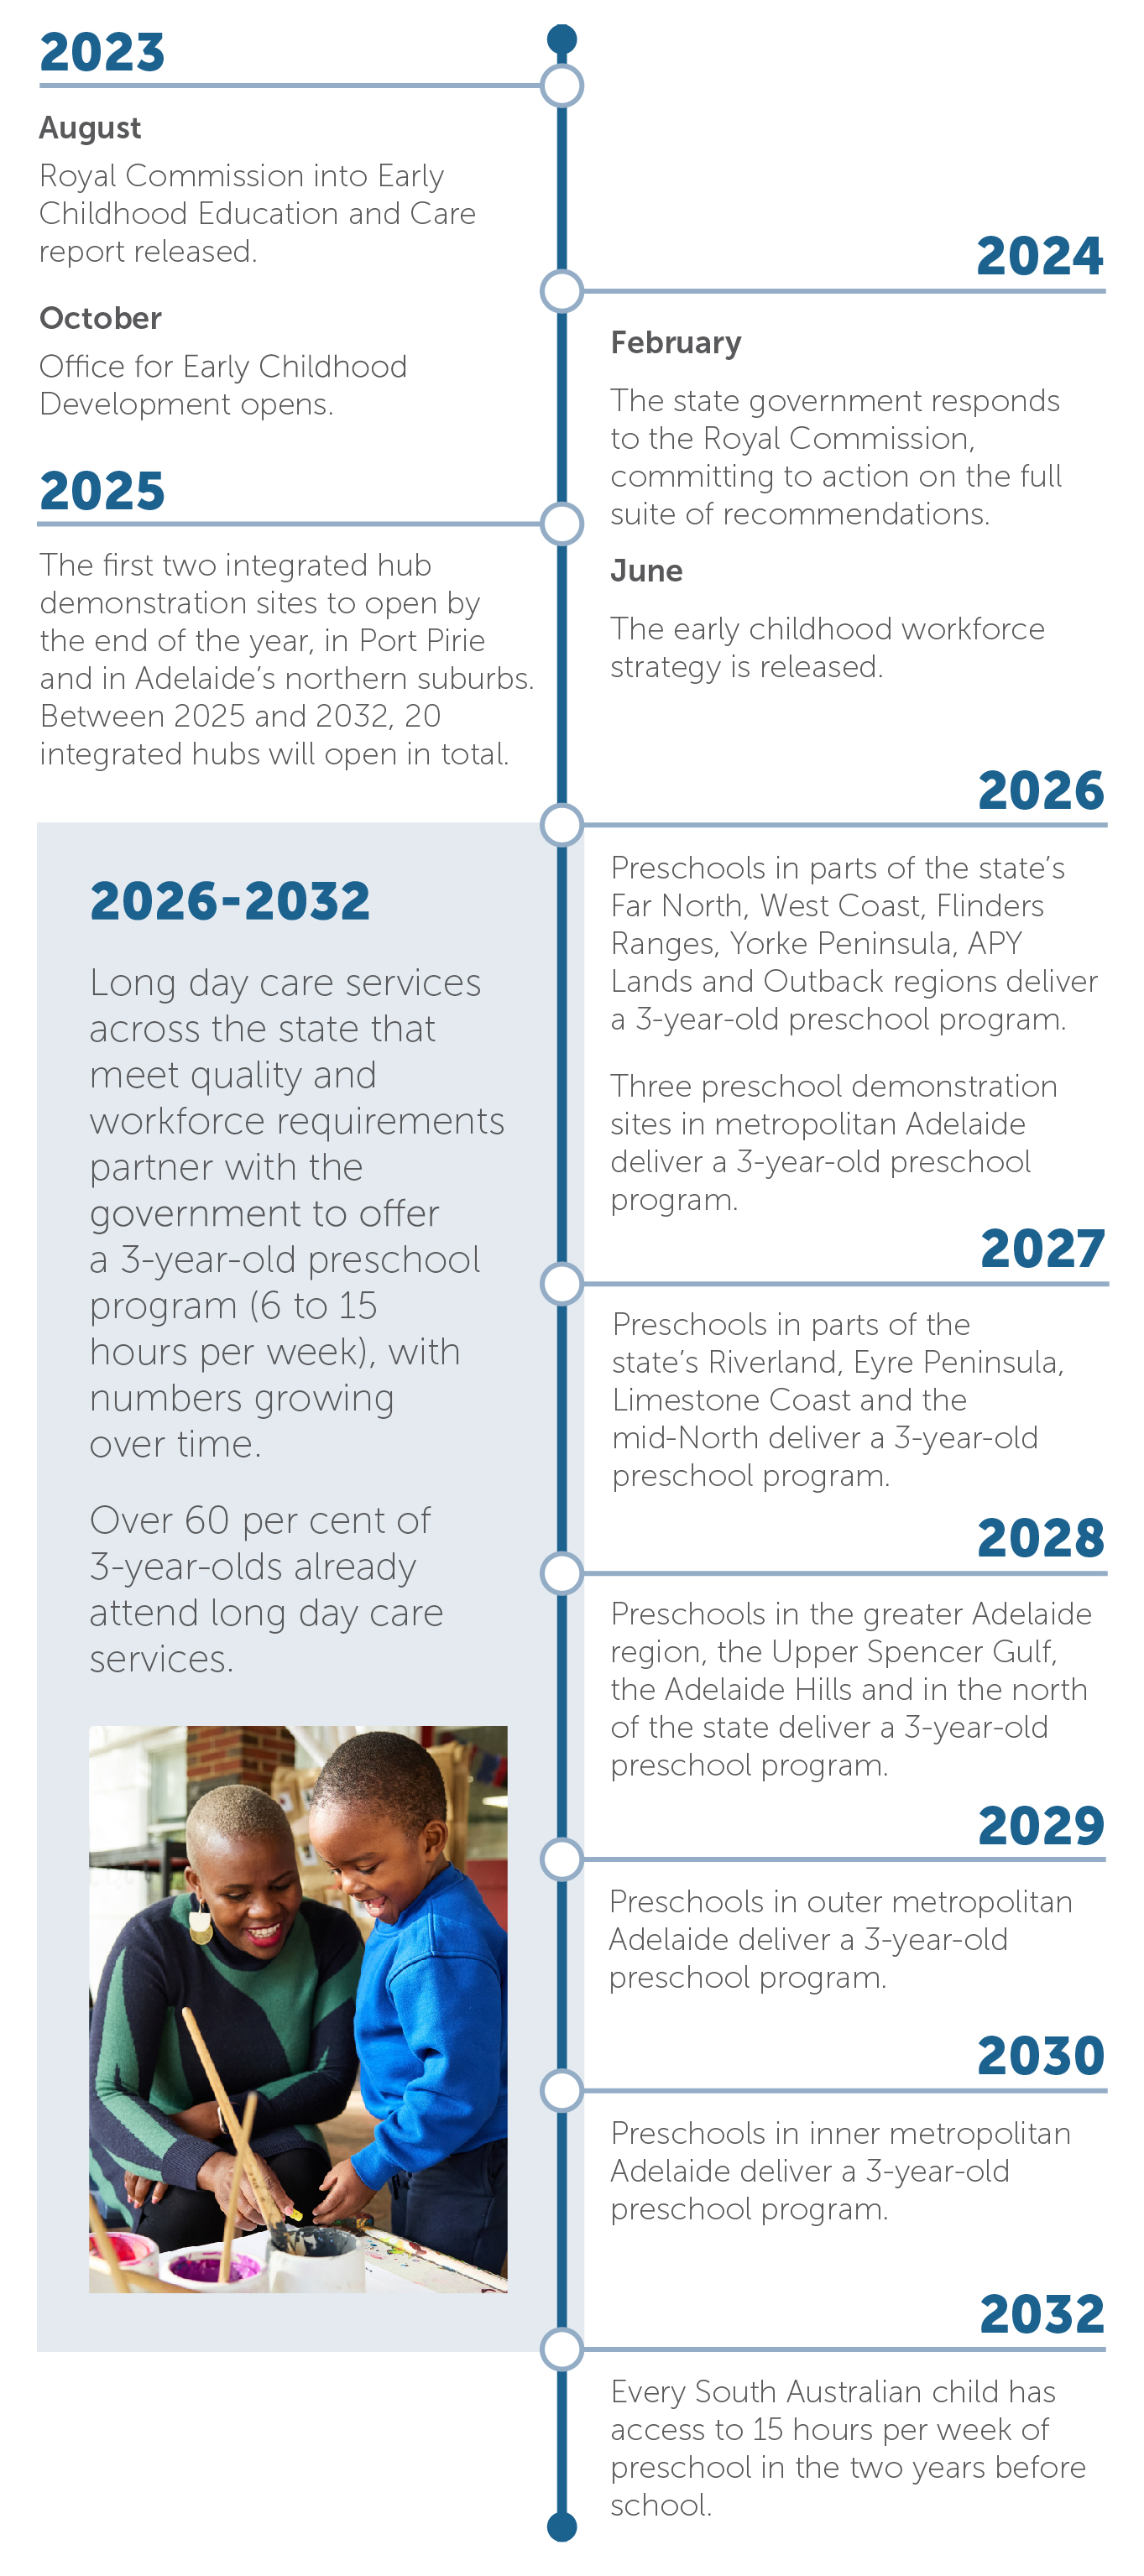 A timeline graphic showing past and projected milestones in early childhood reform. In August 2023 the Royal Commission into Early Childhood education and Care report was released. In October 2023 the Office for Early Childhood Development opens. In February 2024 the state government responds to the Royal Commission, committing to action on the full suite of recommendations. In June of 2024 the early childhood workforce strategy is released. In 2025 the first two integrated hub demonstration sites are to open by the end of the year (2025), in Port Pirie and in Adelaide’s northern suburbs. Between 2025 and 2032, 20 integrated hubs will open in total. In 2026 preschools in parts of the state’s Far North, West Coast, Flinders Ranges, Yorke Peninsula, APY Lands and Outback regions deliver a 3-year-old preschool program. Three preschool demonstration sites in metropolitan Adelaide deliver a 3-year-old preschool program. In 2027 preschools in parts of the state’s Riverland, Eyre Peninsula, Limestone Coast and the mid-North deliver a 3-year-old preschool program. In 2028 preschools in the greater Adelaide region, the Upper Spencer Gulf, the Adelaide Hills and in the north of the state deliver a 3-year-old preschool program. In 2029 preschools in outer metropolitan Adelaide deliver a 3-year-old preschool program. In 2030 preschools in inner metropolitan Adelaide deliver a 3-year-old preschool program. In 2032 every South Australian child has access to 15 hours per week of preschool in the two years before school. Between 2026 and 2032 long day care services across the state that meet quality and workforce requirements partner with the government to offer a 3-year-old preschool program (6 to 15 hours per week), with numbers growing over time. Over 60 per cent of 3-year-olds already attend long day care services.